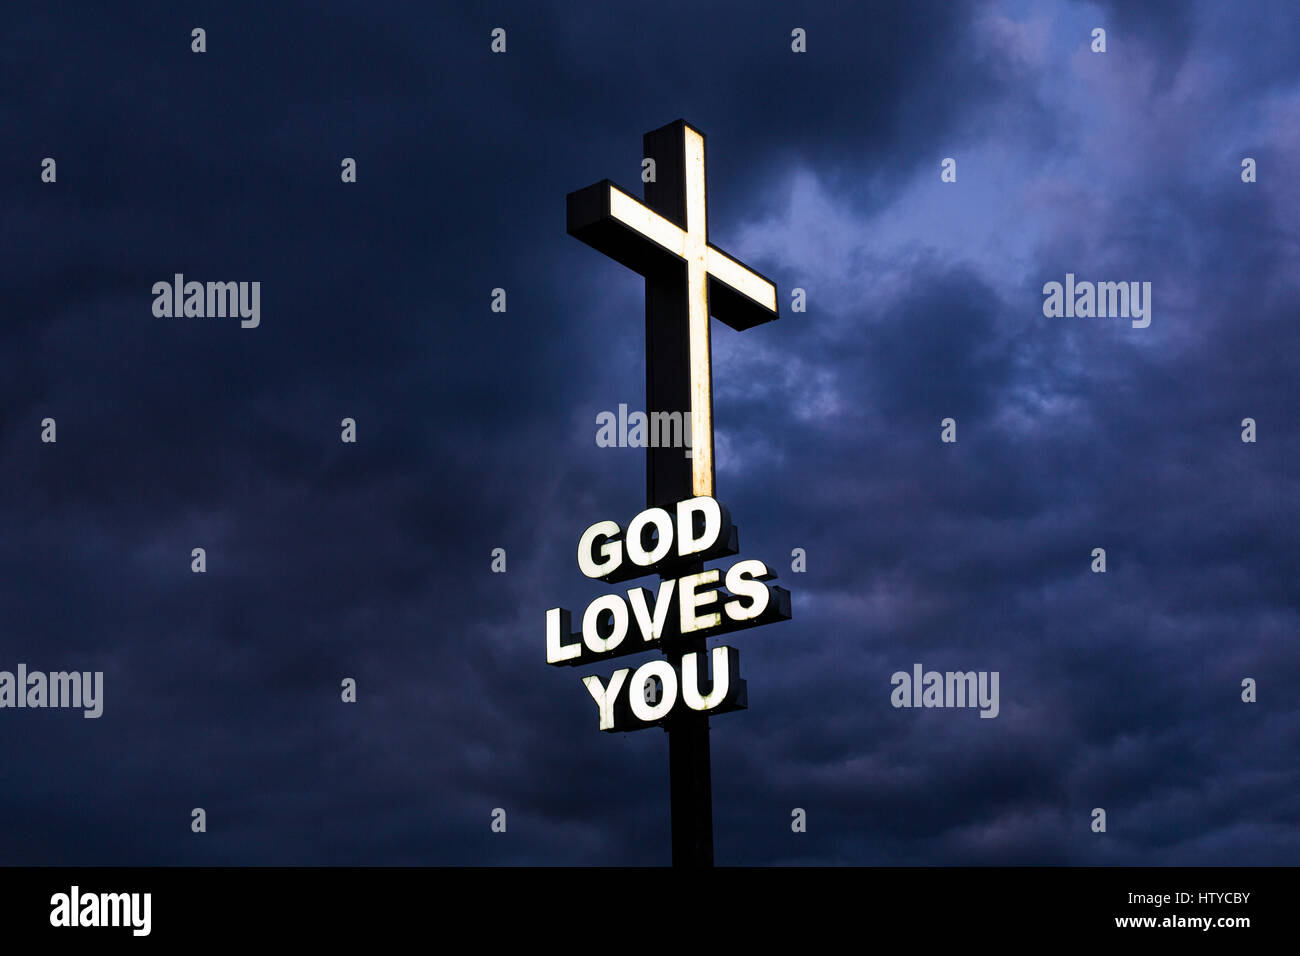 God Loves You sign with illuminated cross against a stormy sky Stock Photo